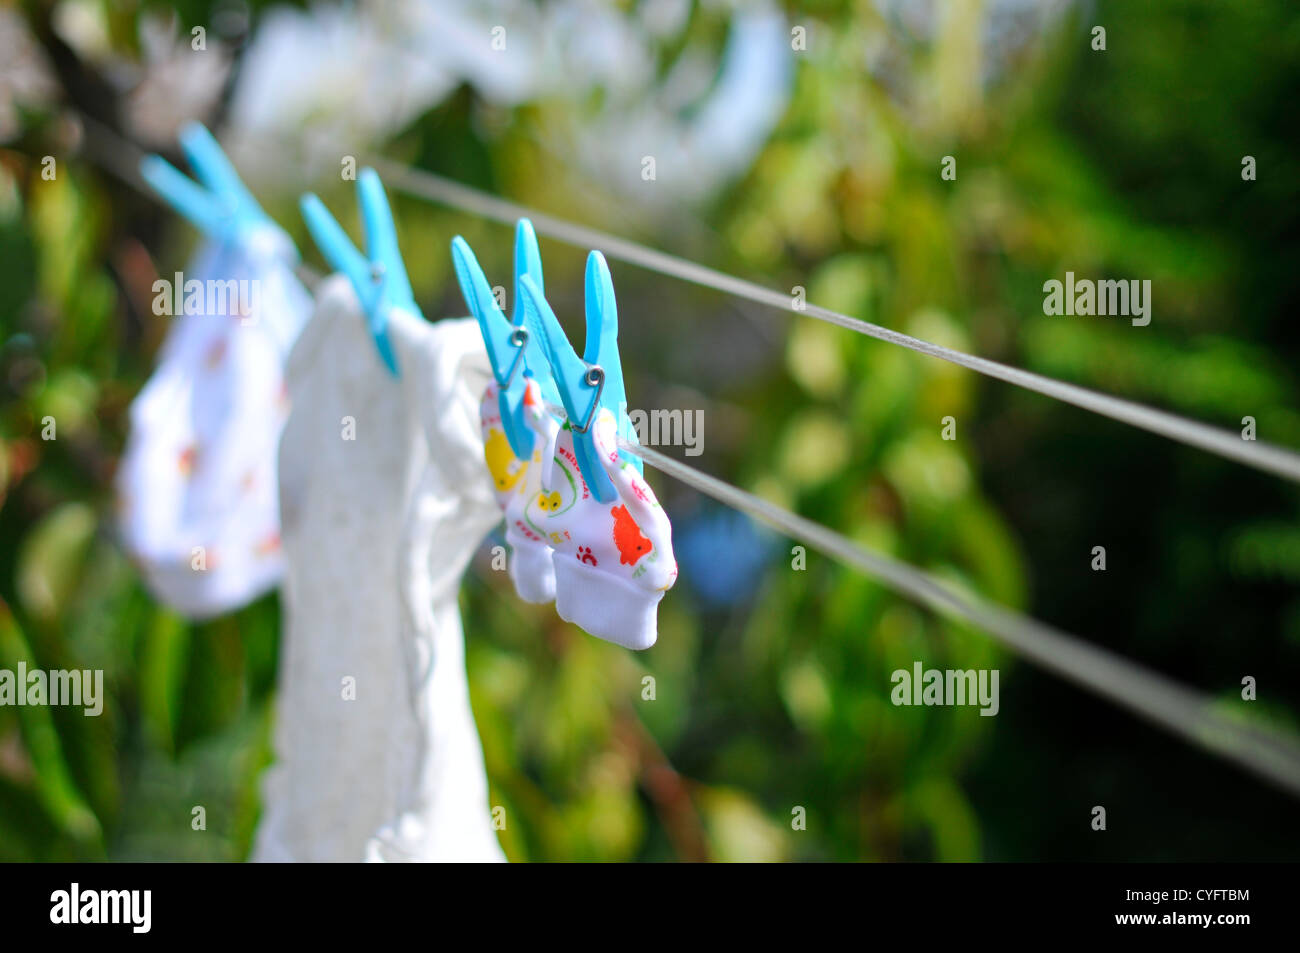 New born baby clothes hand on a washing line ready for a new arrival. Stock Photo